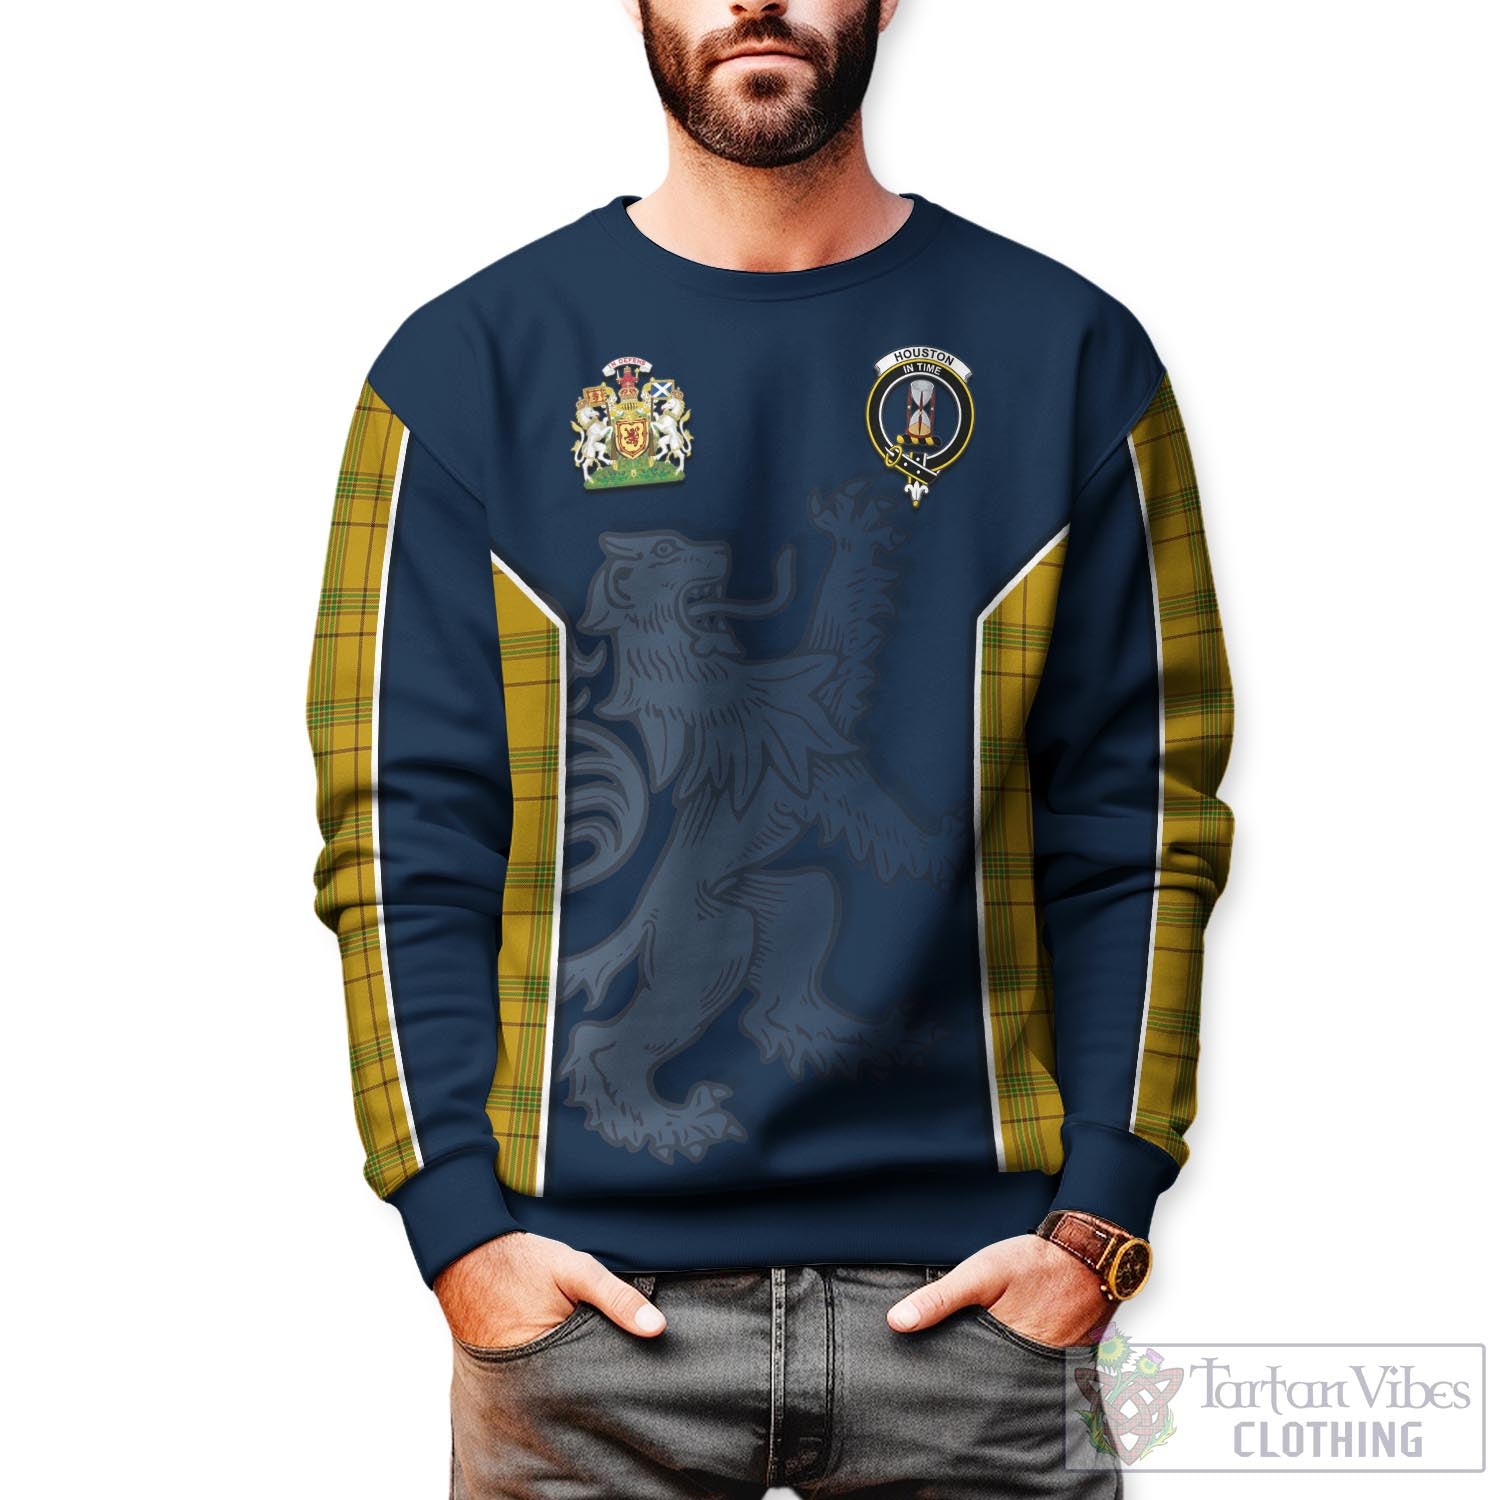 Tartan Vibes Clothing Houston Tartan Sweater with Family Crest and Lion Rampant Vibes Sport Style